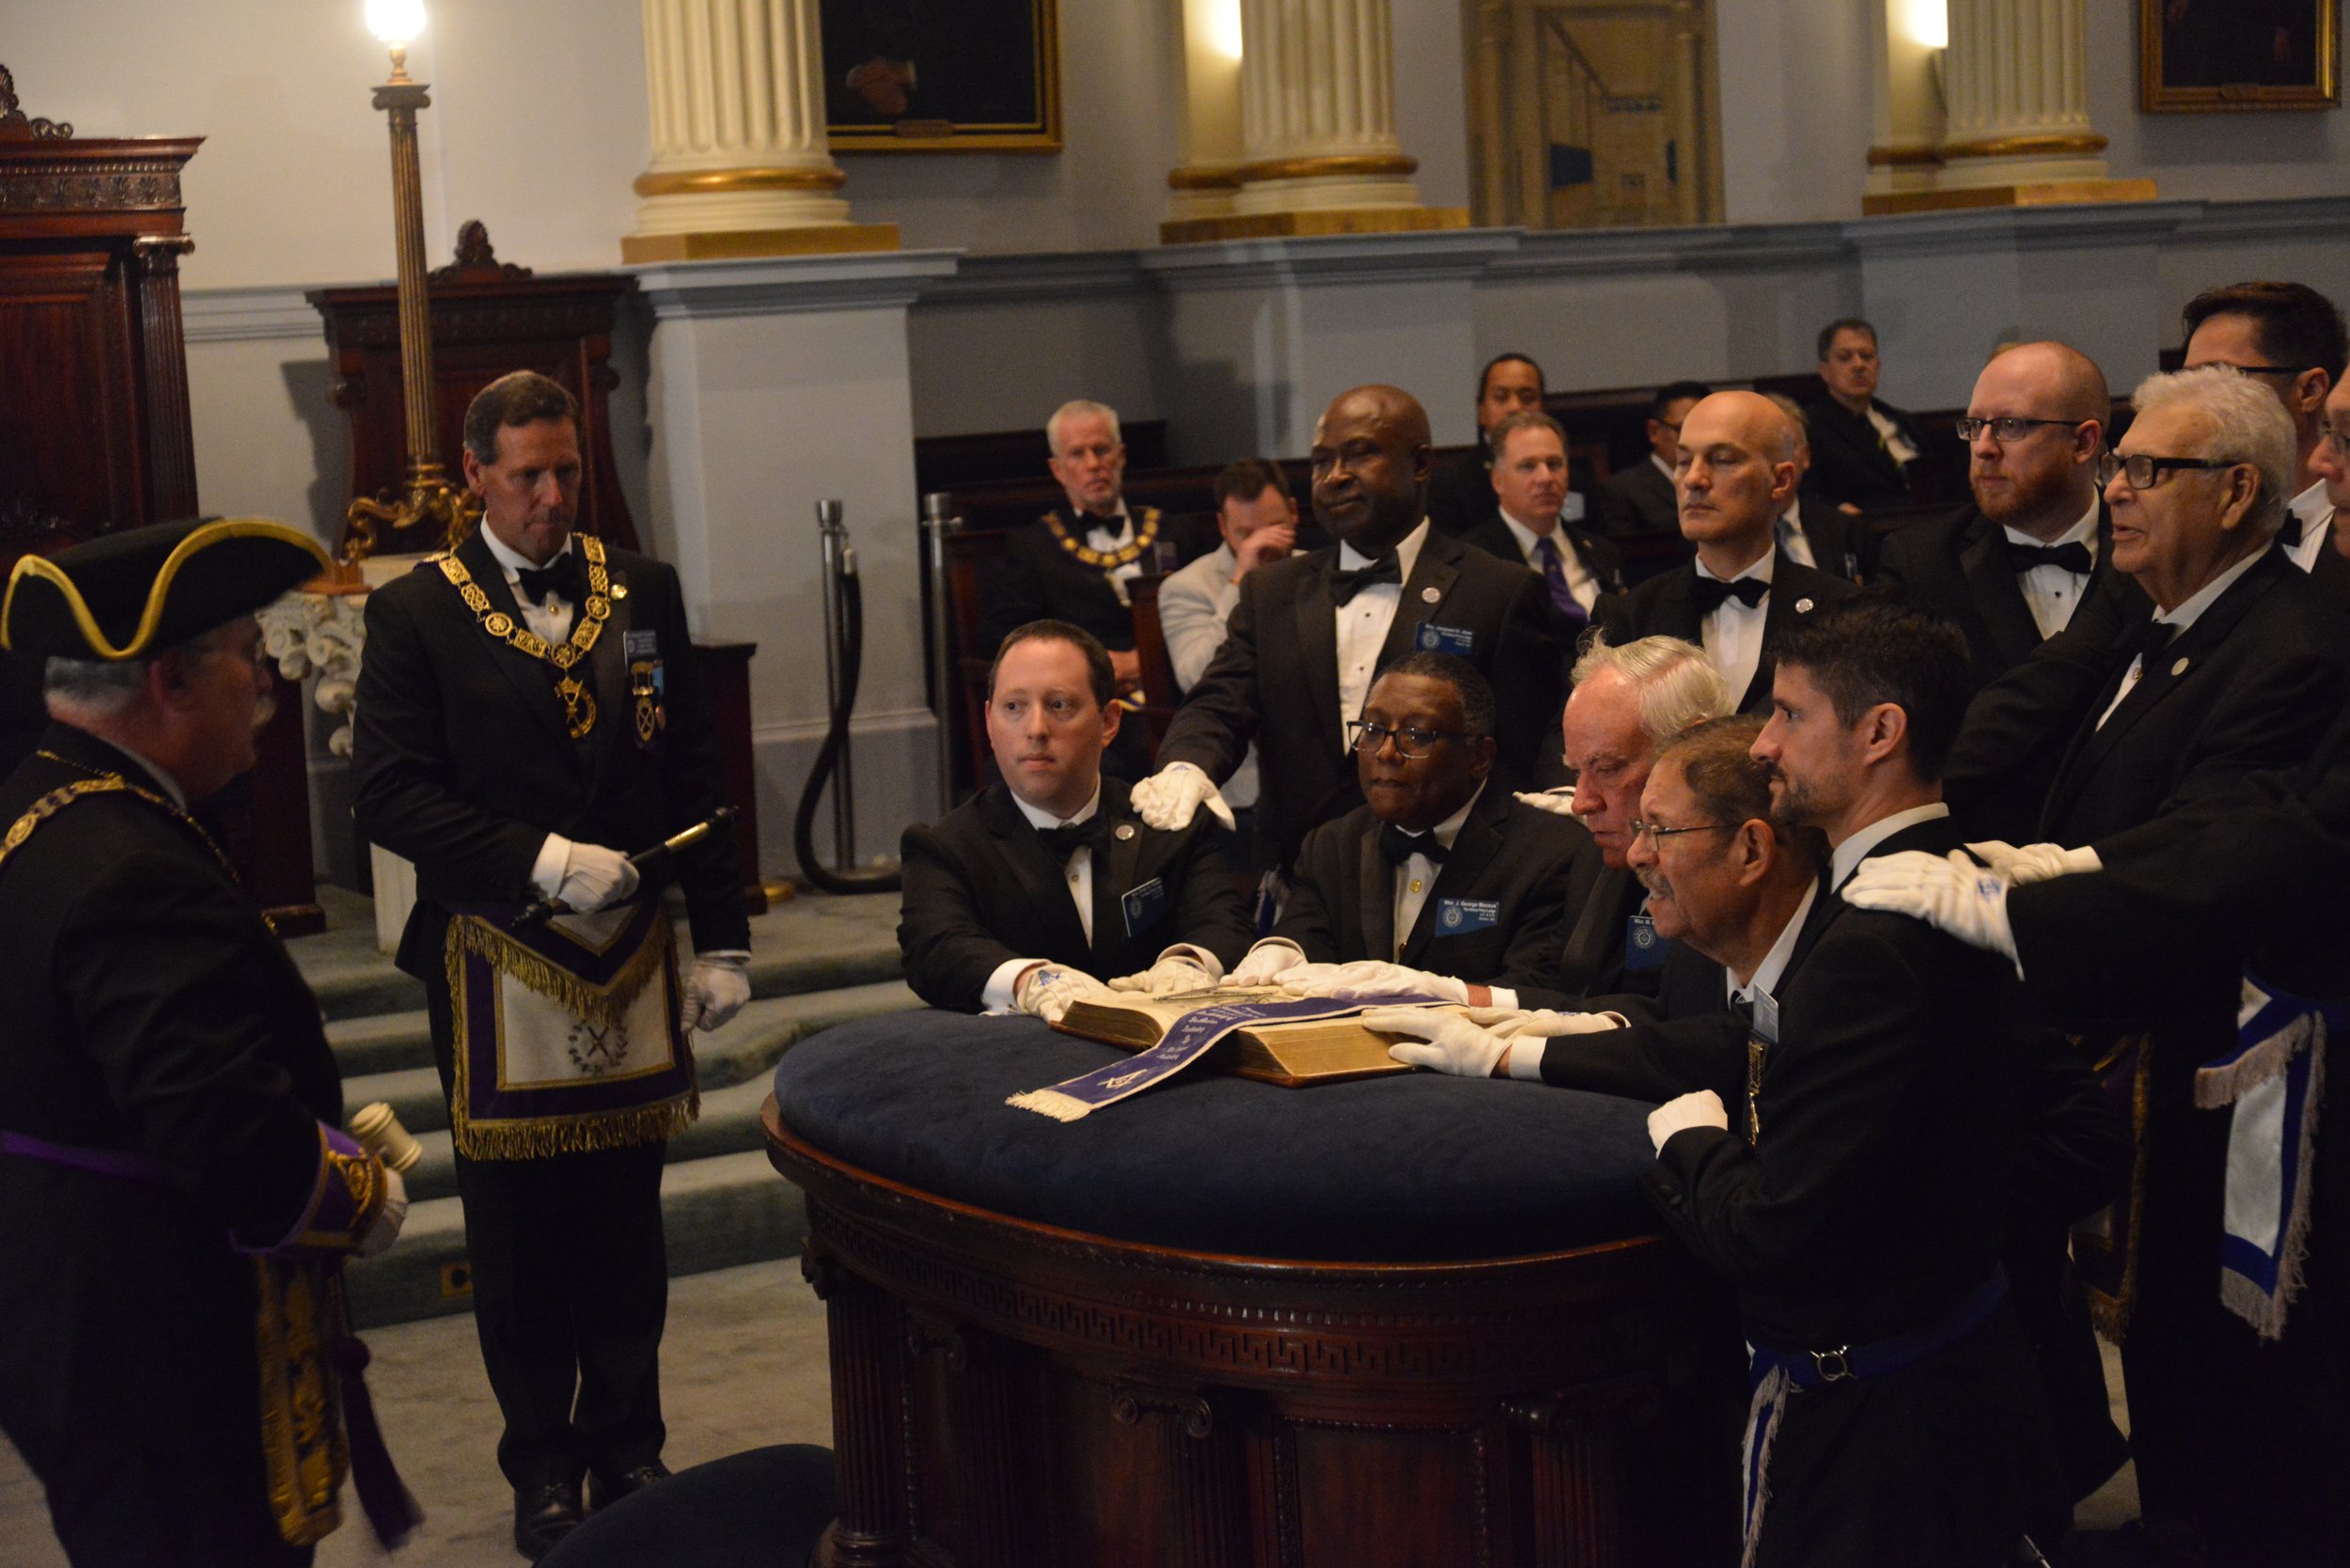  The Grand Master obligates the elected and appointed officers of The Henry Price Lodge 